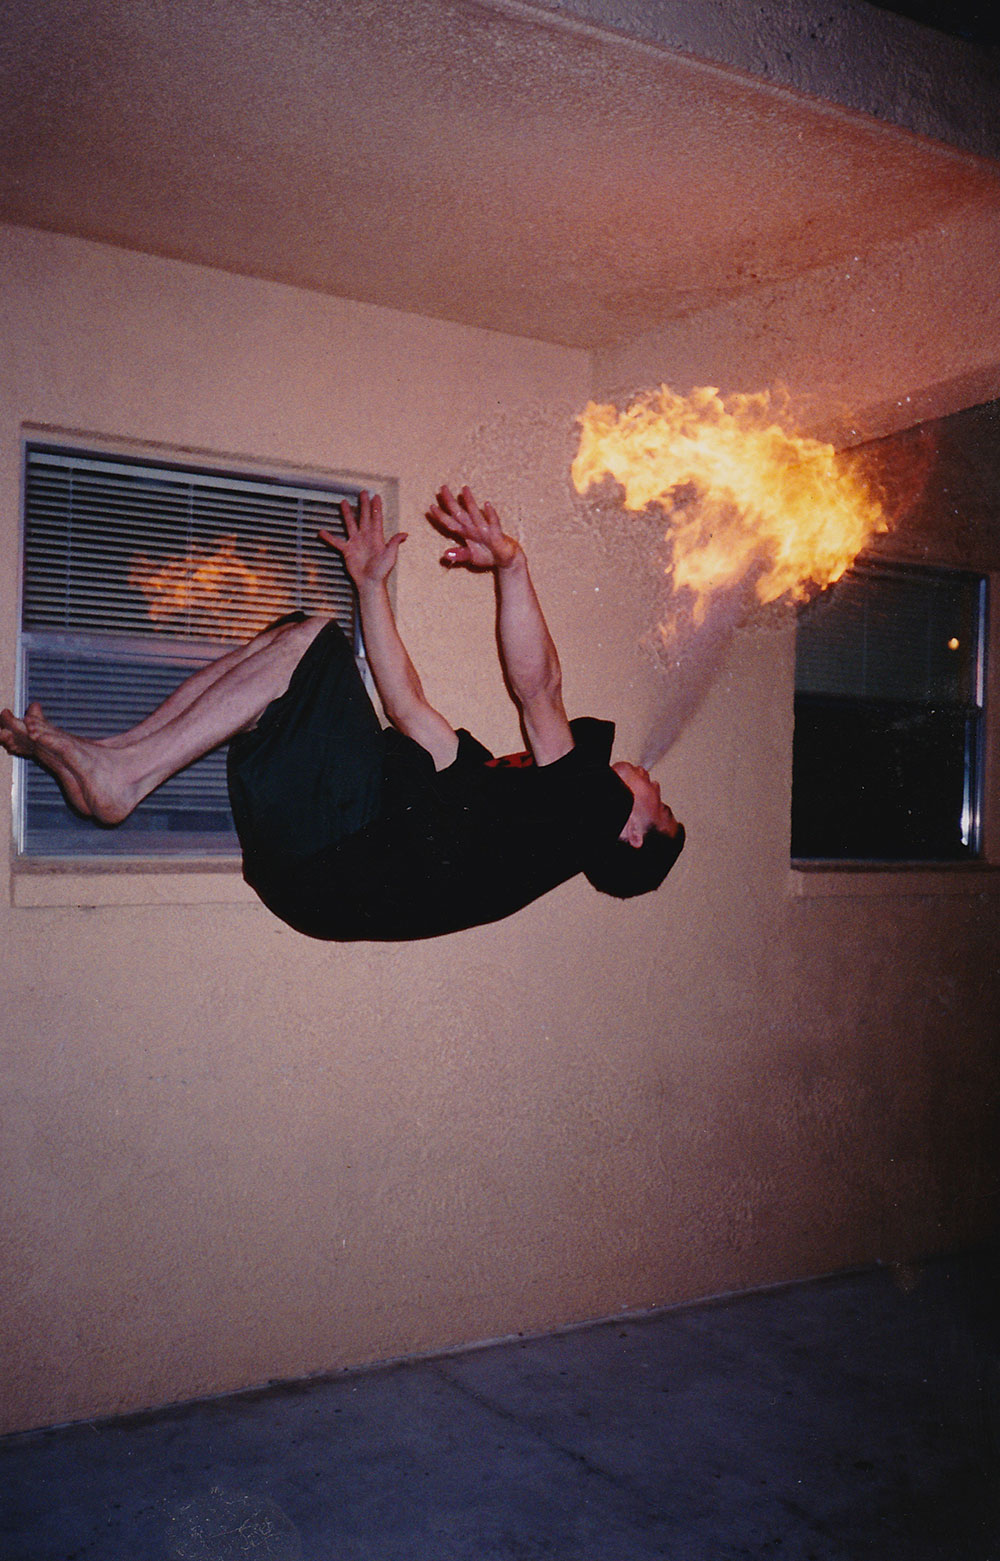 Steve-O doing a backflip while breathing fire. A man wearing black shorts and shirts is blowing fire out of his mouth while halfway through a back flip.